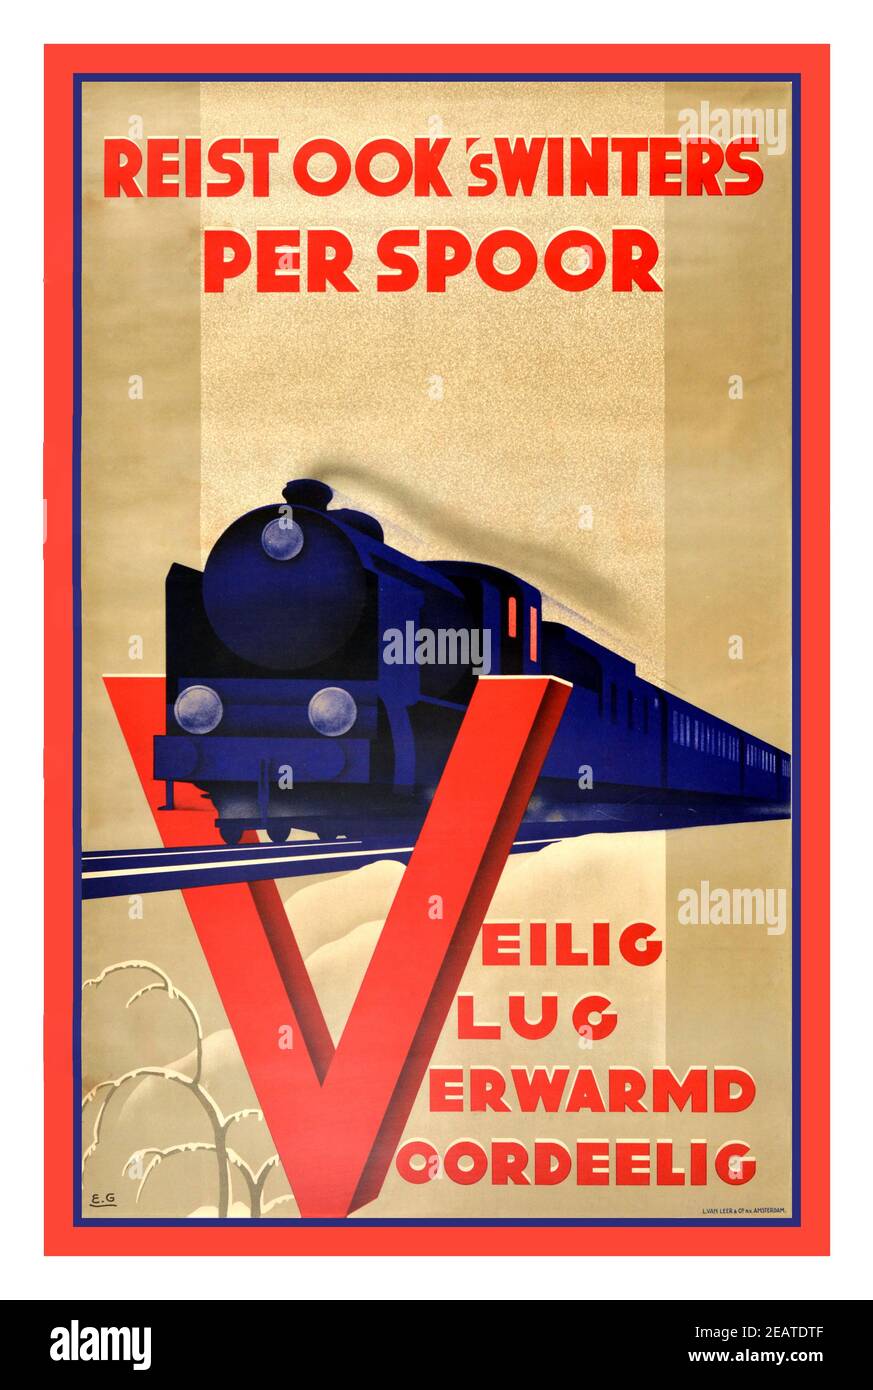 1930's Dutch Rail Travel Poster Railway Travel Winter Art Deco Original travel railway advertising poster titled 'Travel by rail in the winter also - Safe, comfortable, heated, advantageous.' Designed by artist Emmanuel Gaillard, who worked as a designer at the printing company Van Leer & Co in Amsterdam, poster promotes winter travel via rail, and features a futuristic art deco style graphic of a dark blue steam train with bold large red lettering. Country of issue: Netherlands, designer: Emmanuel Gaillard, 1930s Stock Photo